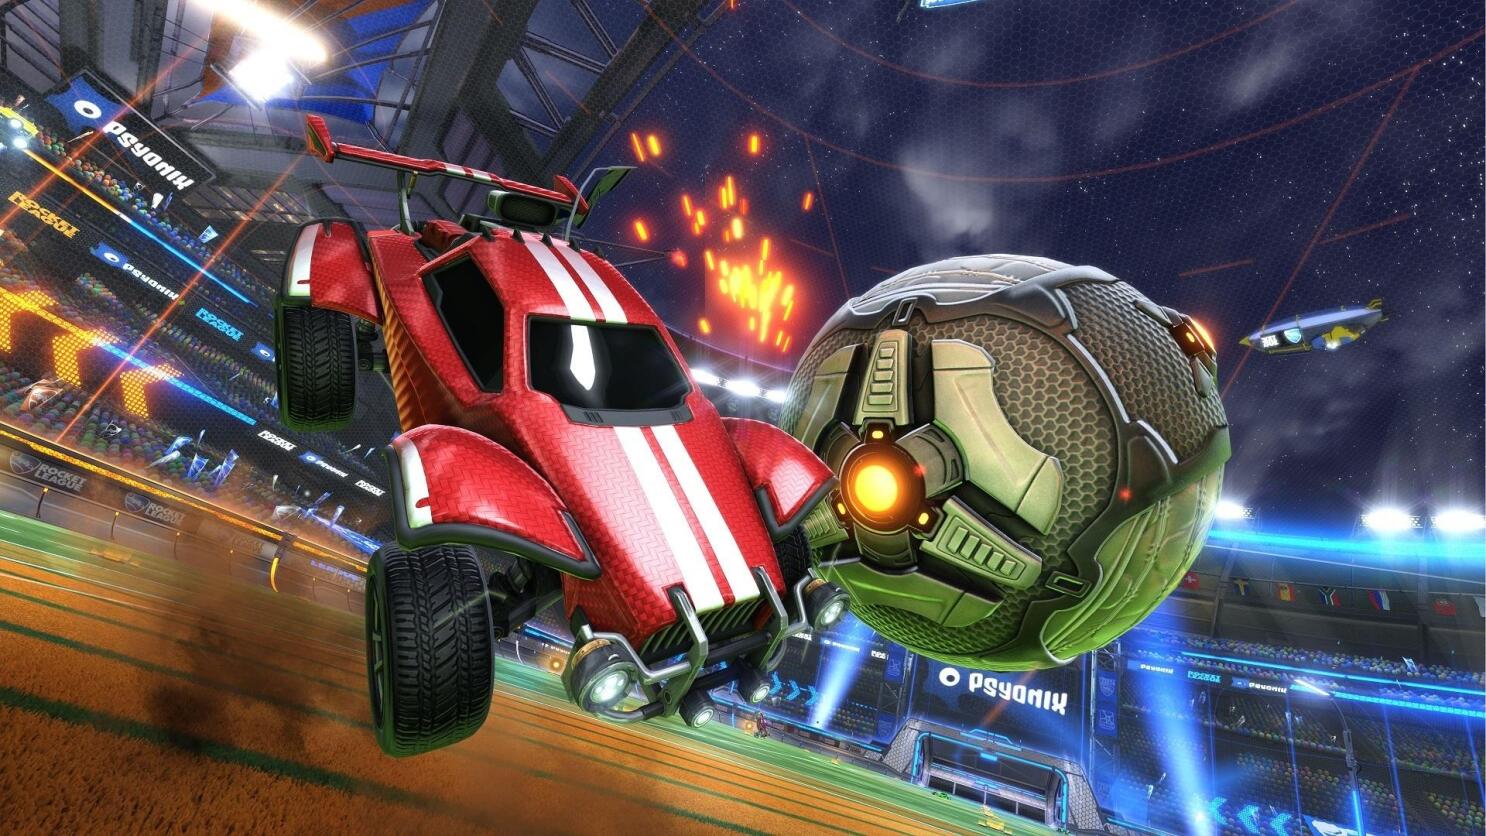 San Diego S Popular Video Game Maker Psyonix Acquired By Fortnite Creator Epic Games The San Diego Union Tribune